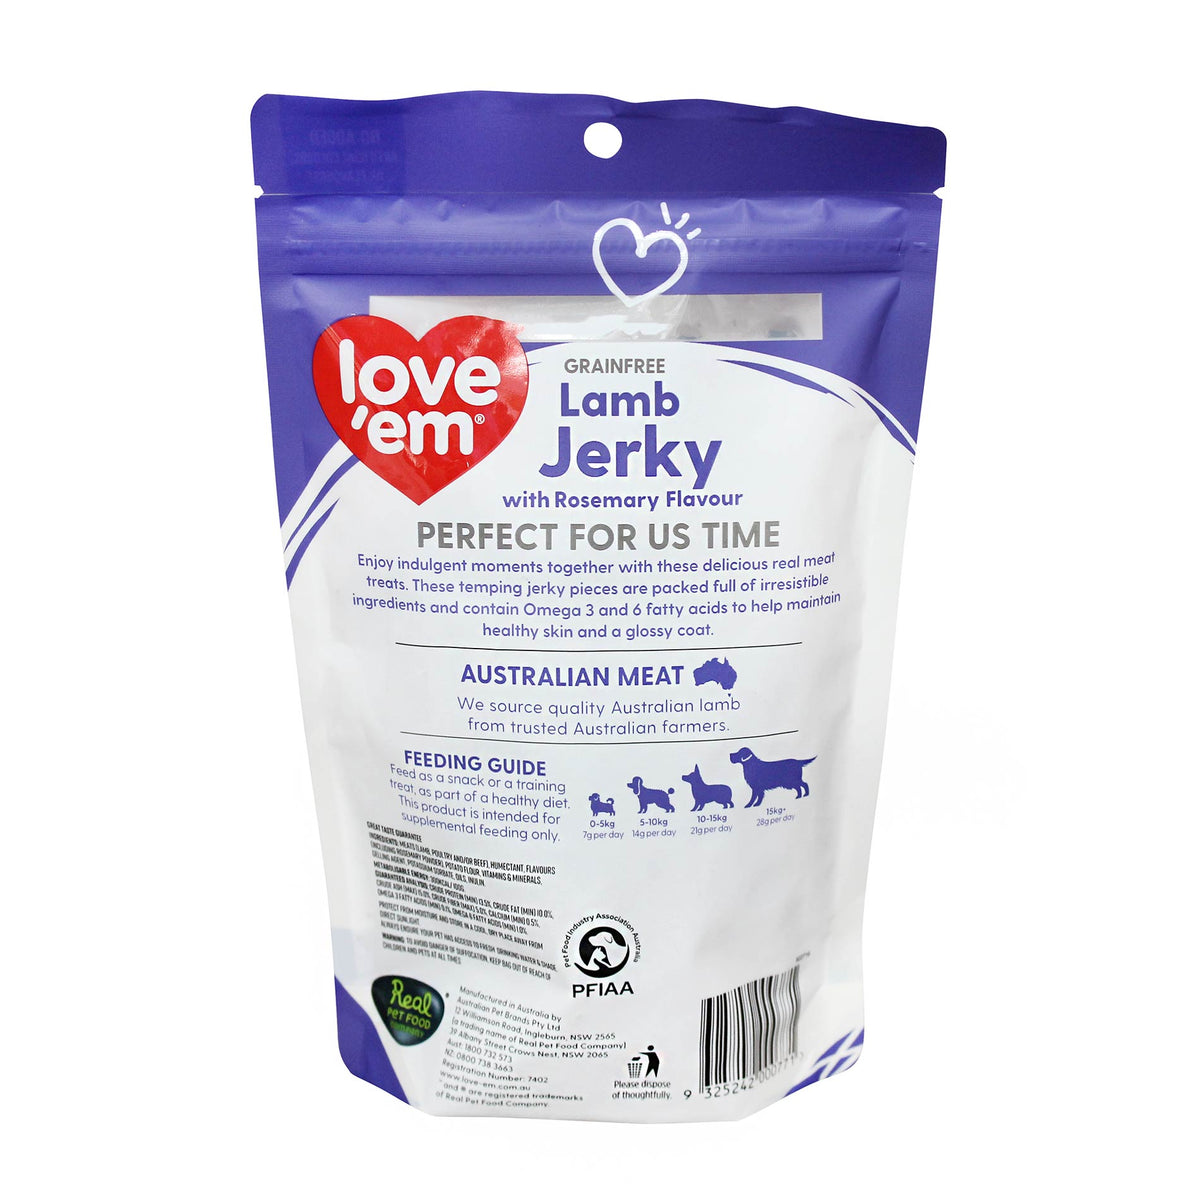 Love&#39;em Grain Free Lamb Jerky with Rosemary Flavour 200g